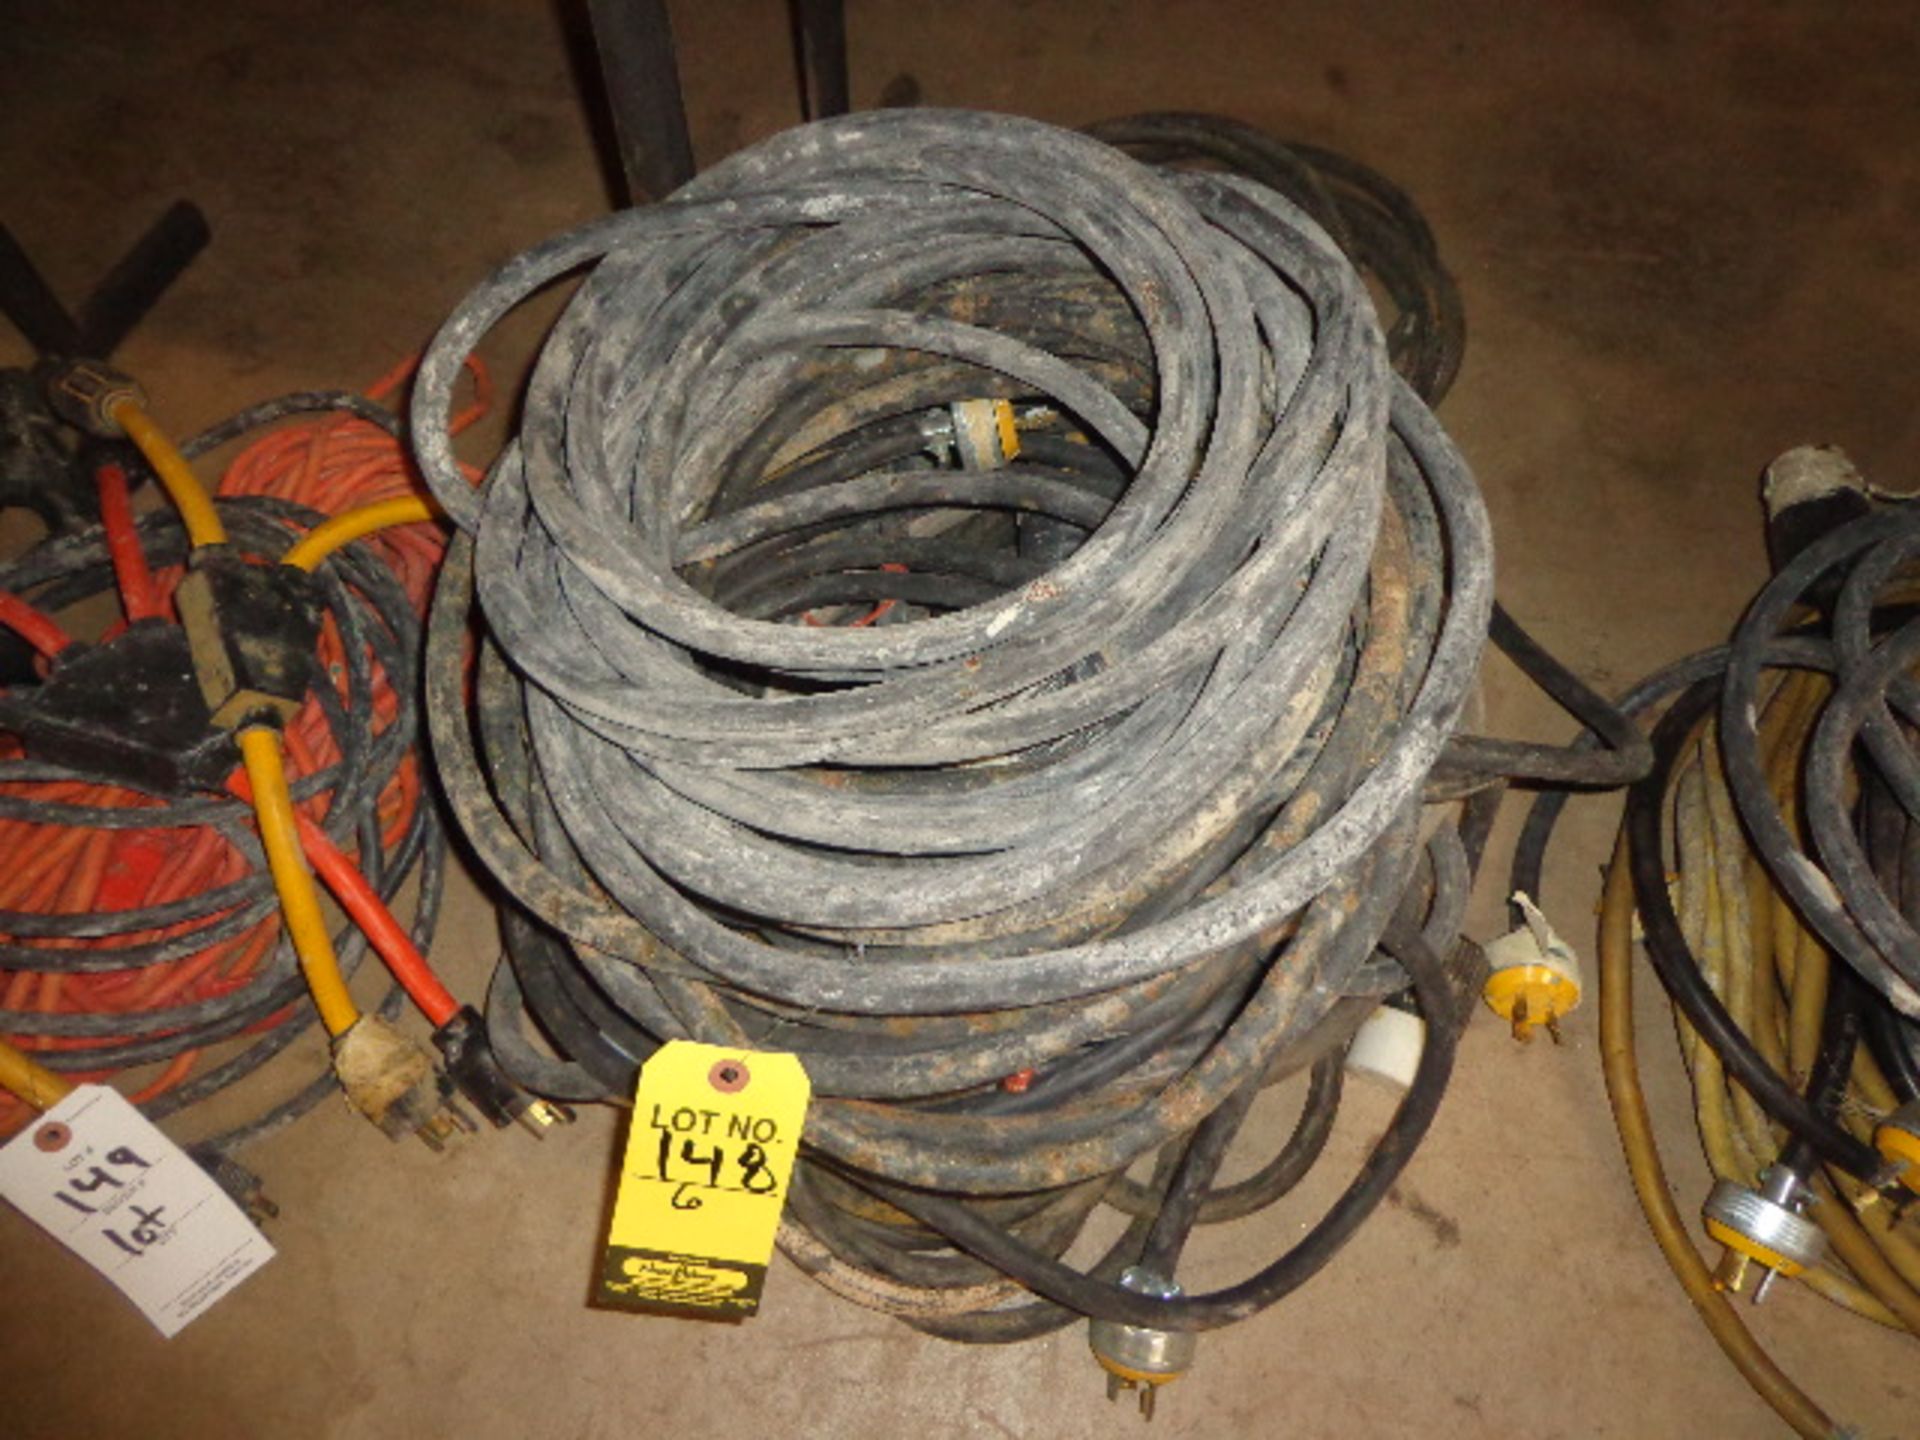 LOT 6 HD ELECTRIC CORDS, APPROX. 25-50'